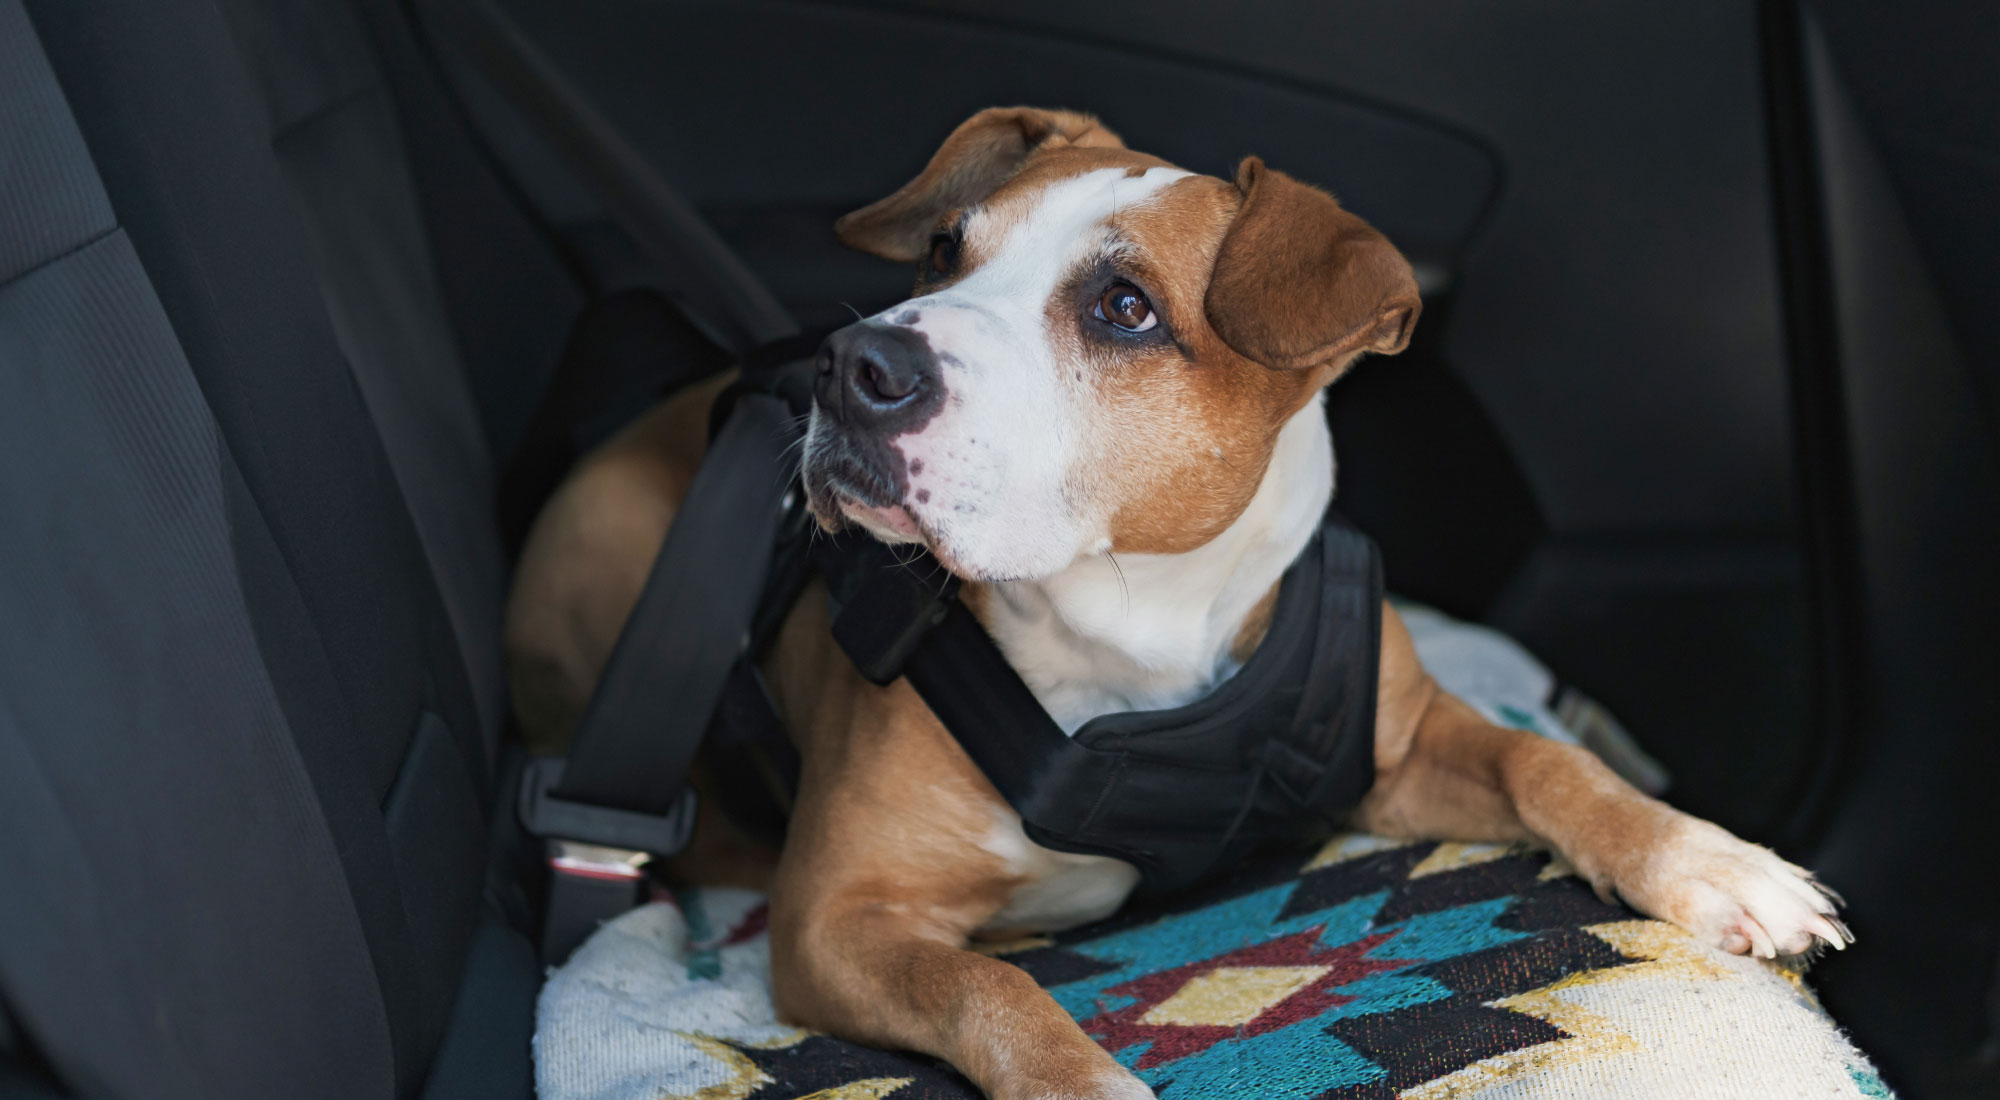 Dog lying in back seat of a car in a seatbelt harness